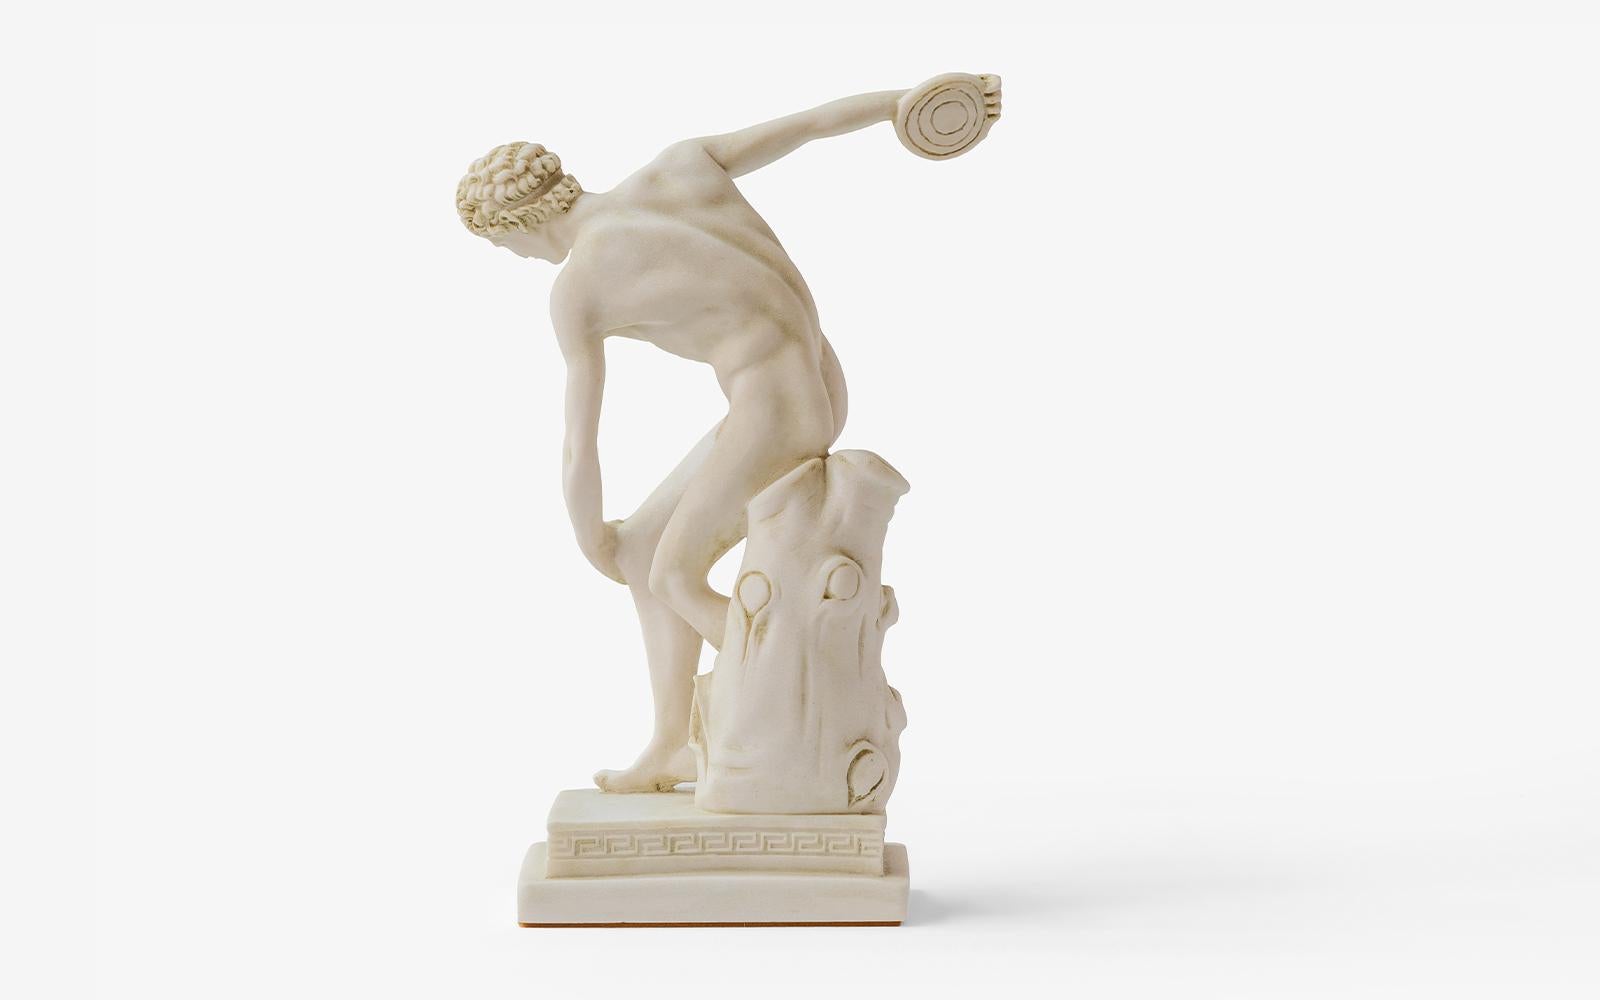 who sculpted the discus thrower